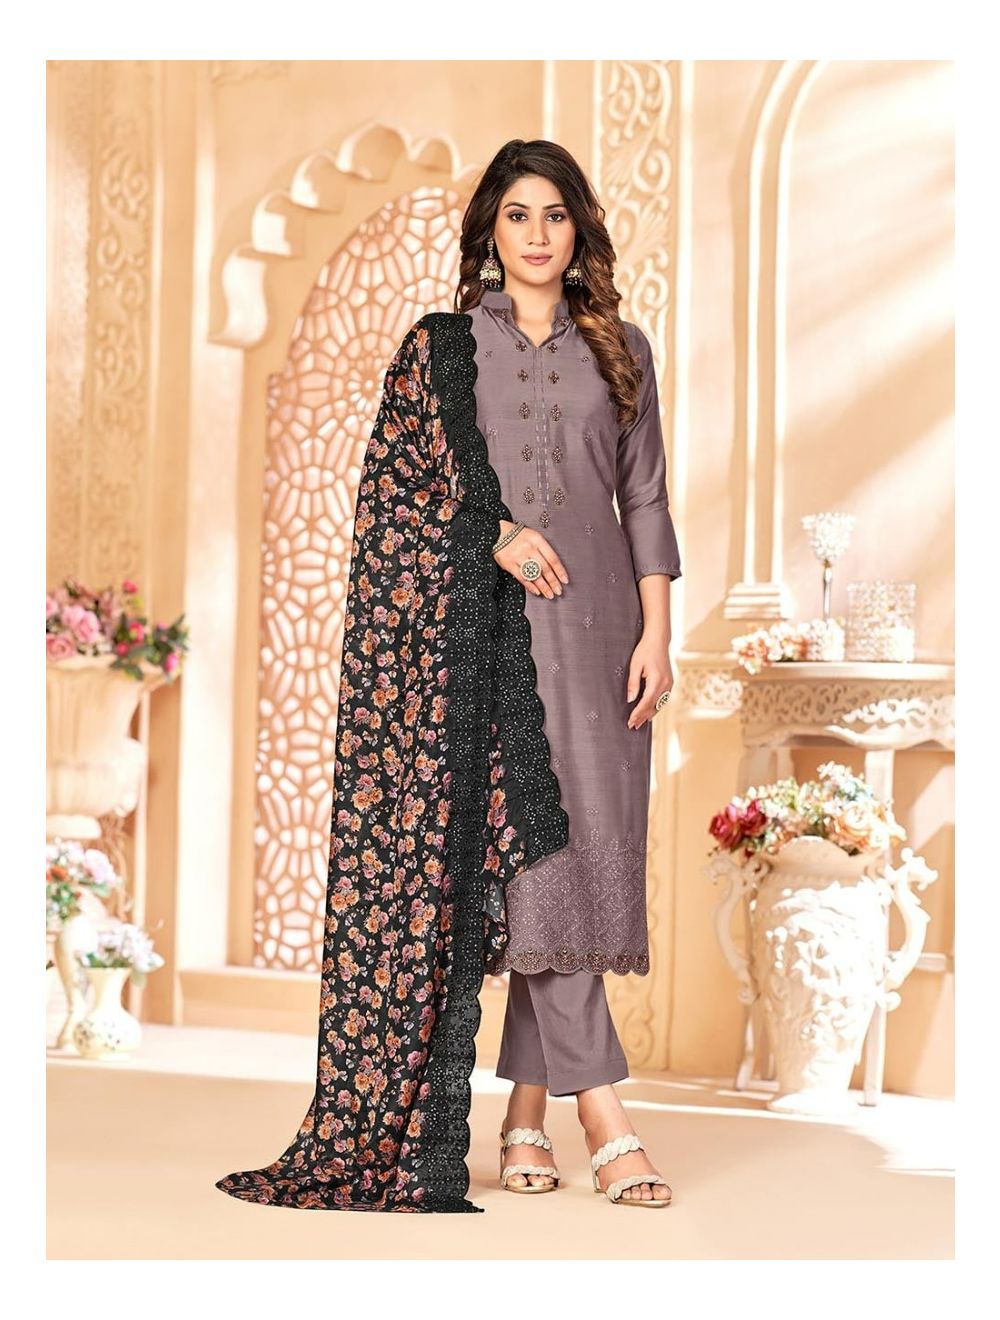 Buy New Arrival Unstitched Salwar Suits Online At Best Prices – Koskii